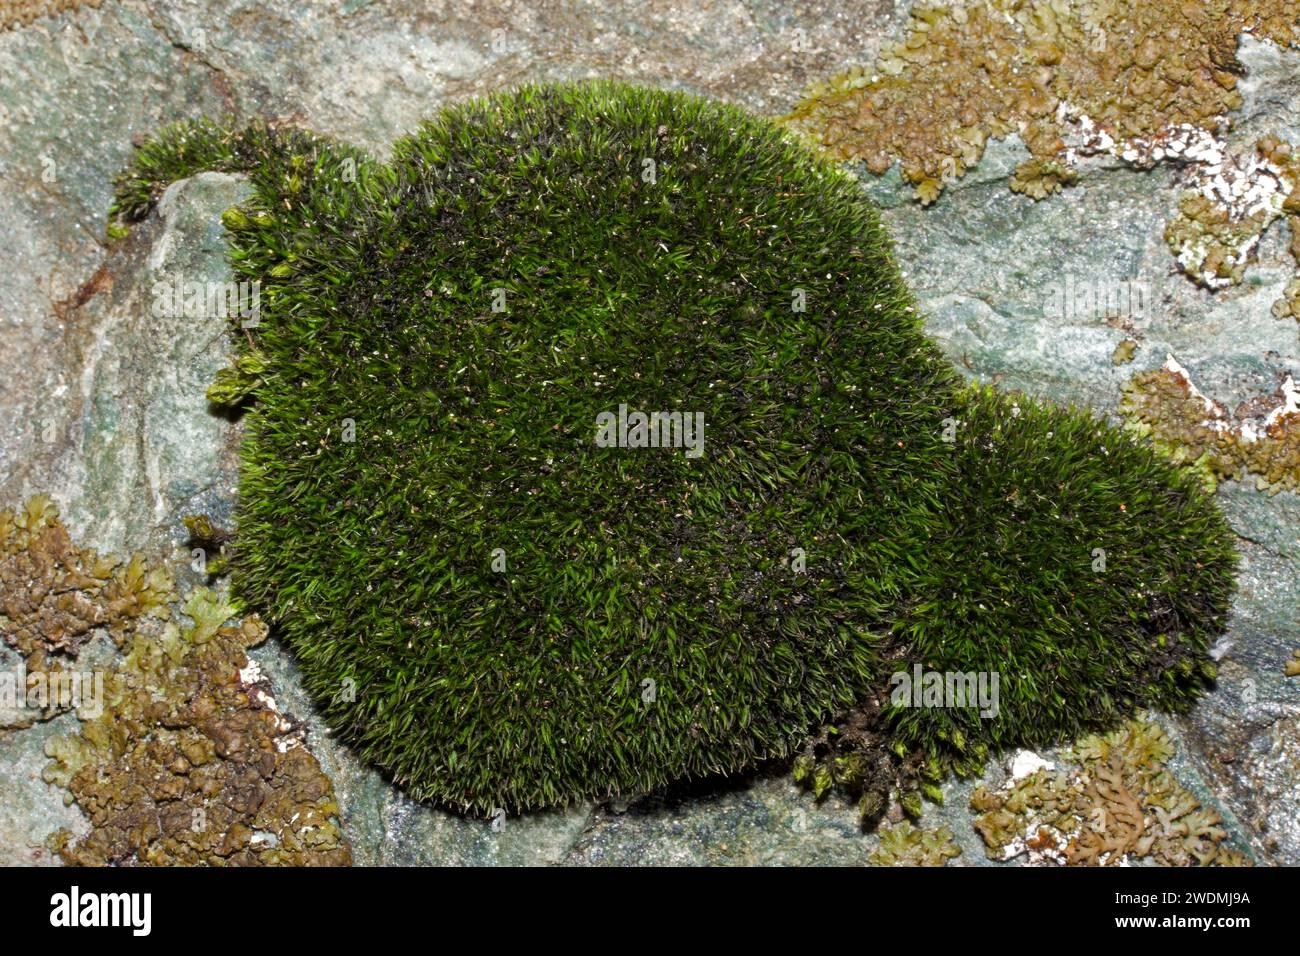 the-moss-schistidium-maritimum-seaside-grimmia-grows-in-shallow-crevices-in-coastal-rocks-its-mostly-confined-to-the-northern-hemisphere-2WDMJ9A.jpg